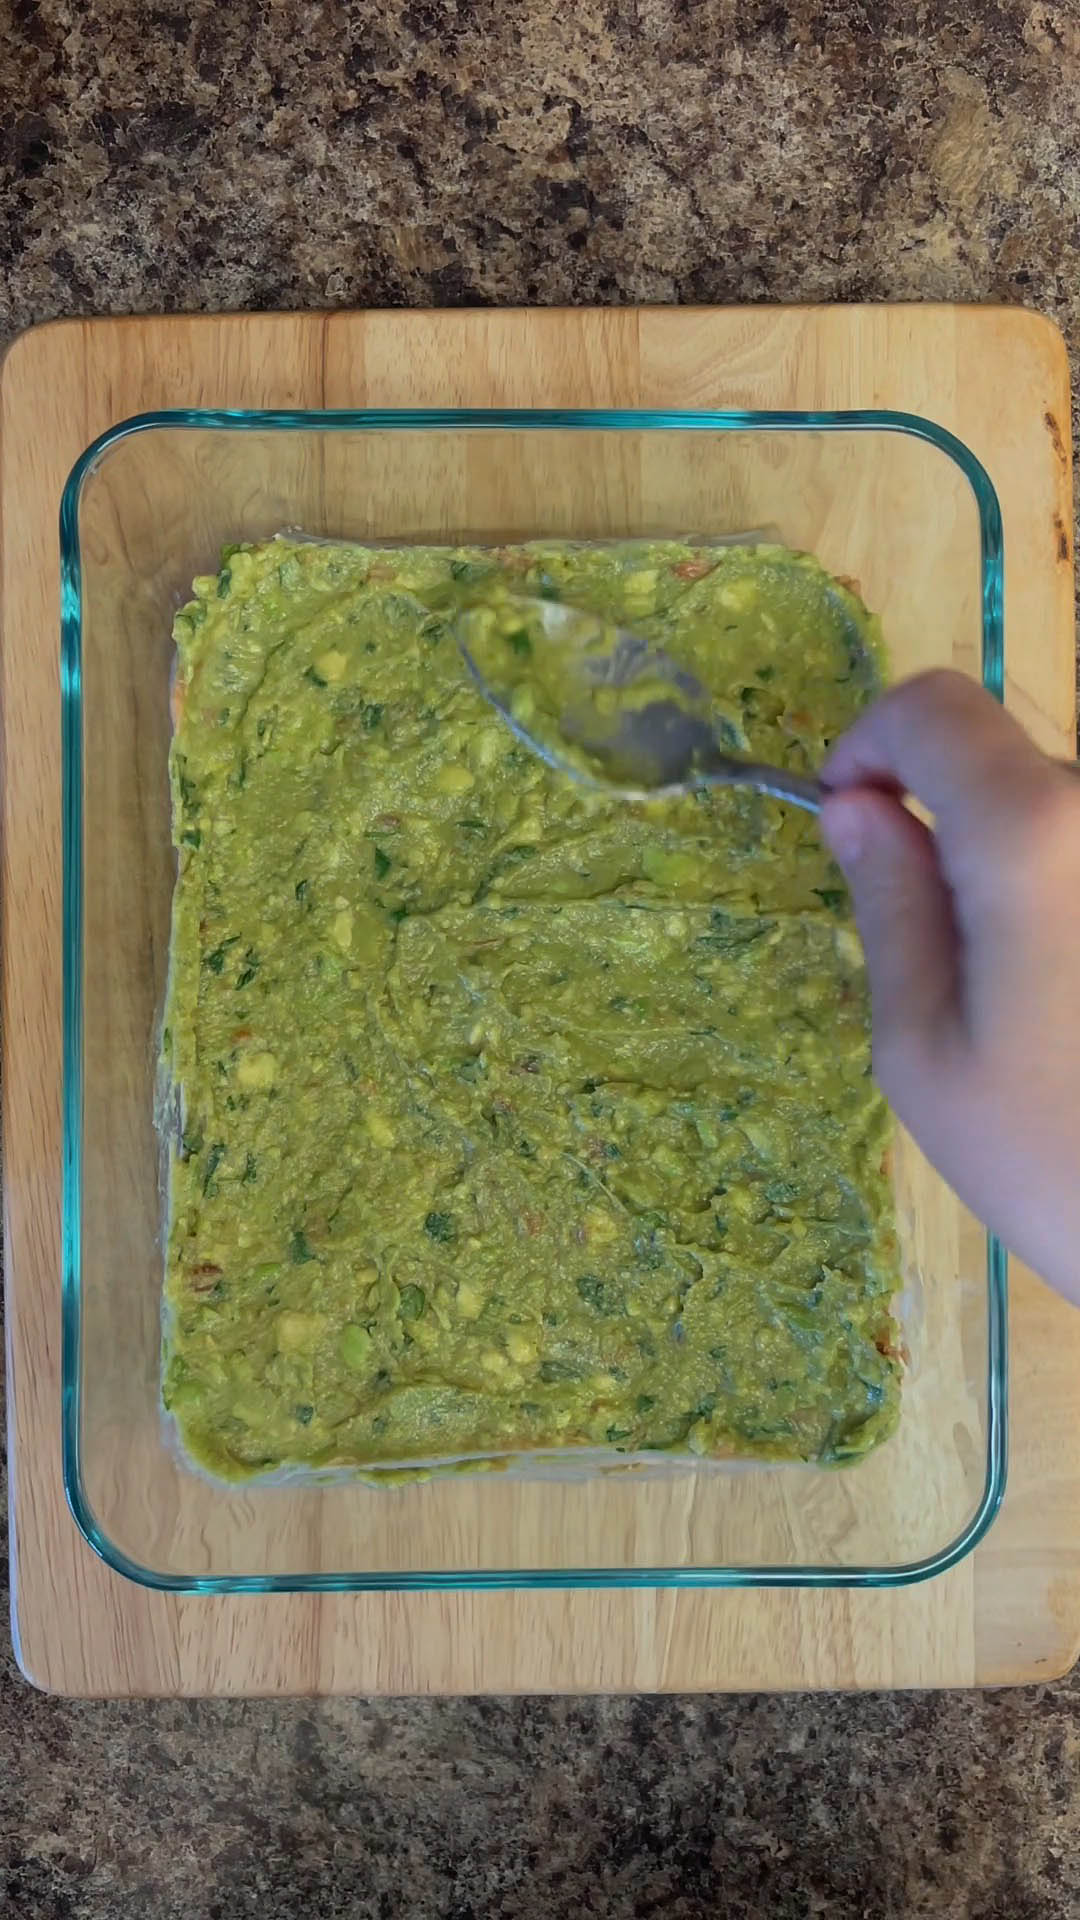 Guacamole spread on top of refried beans.